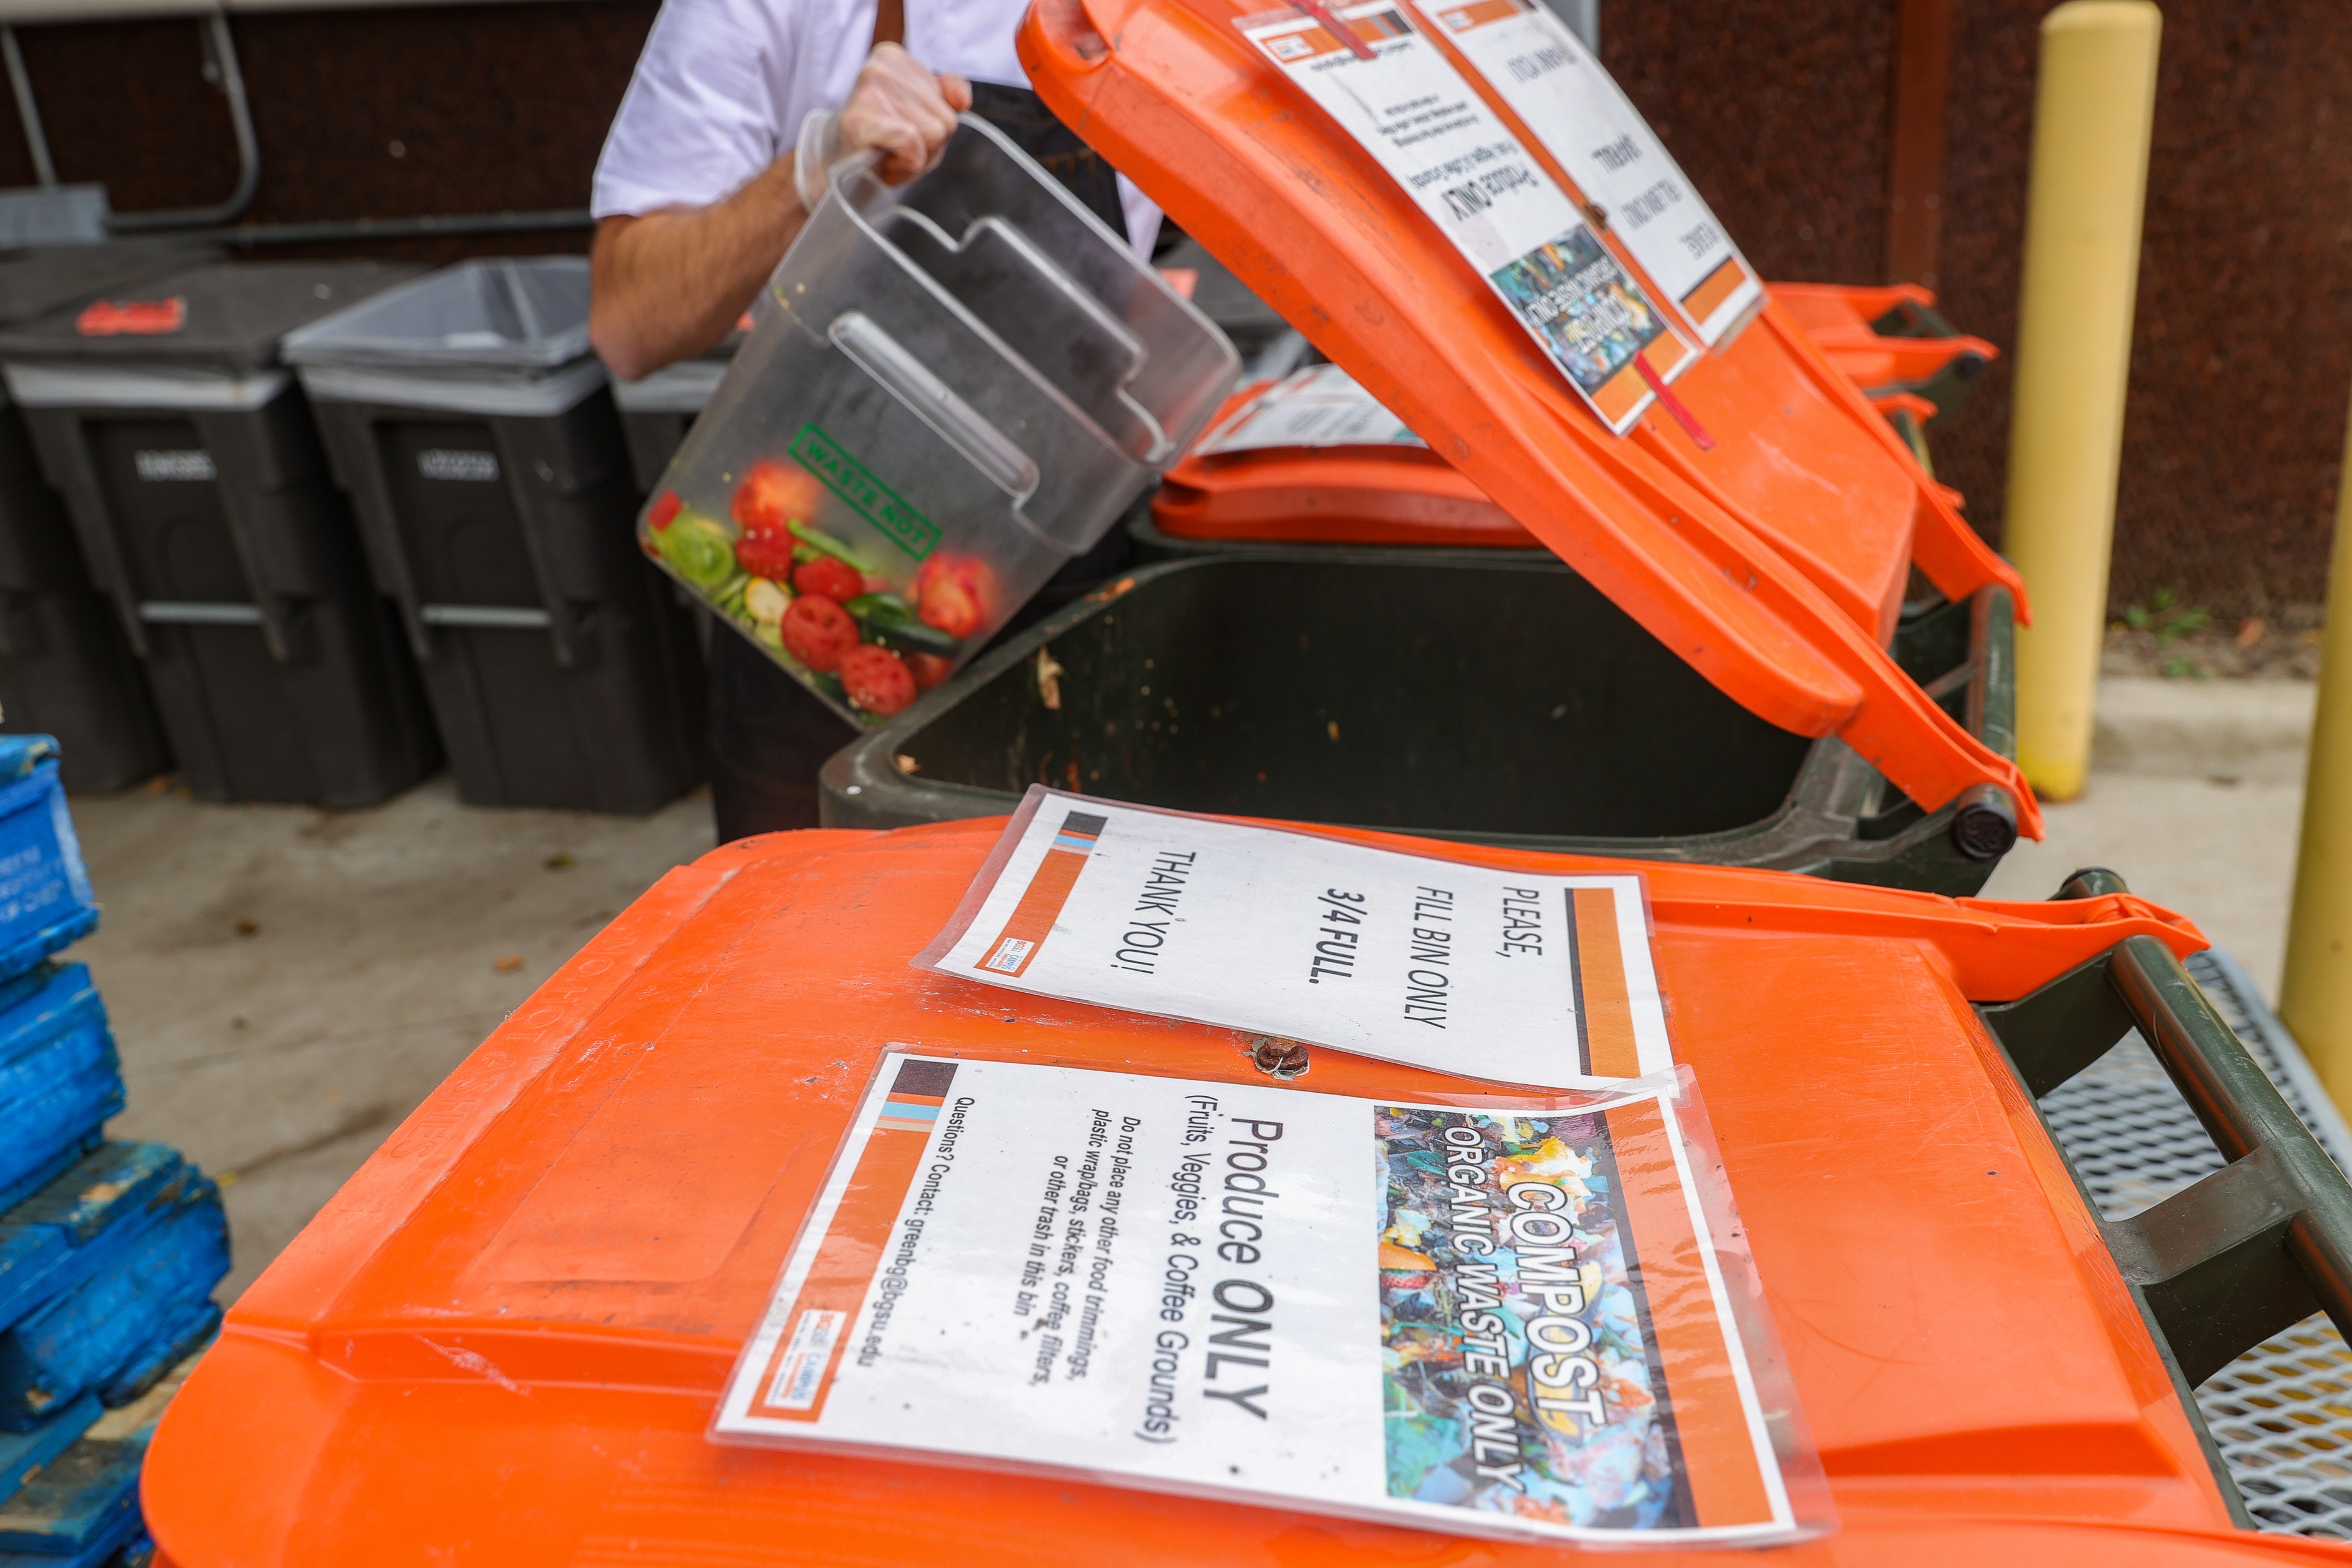 food waste being placed into bins with orange lids